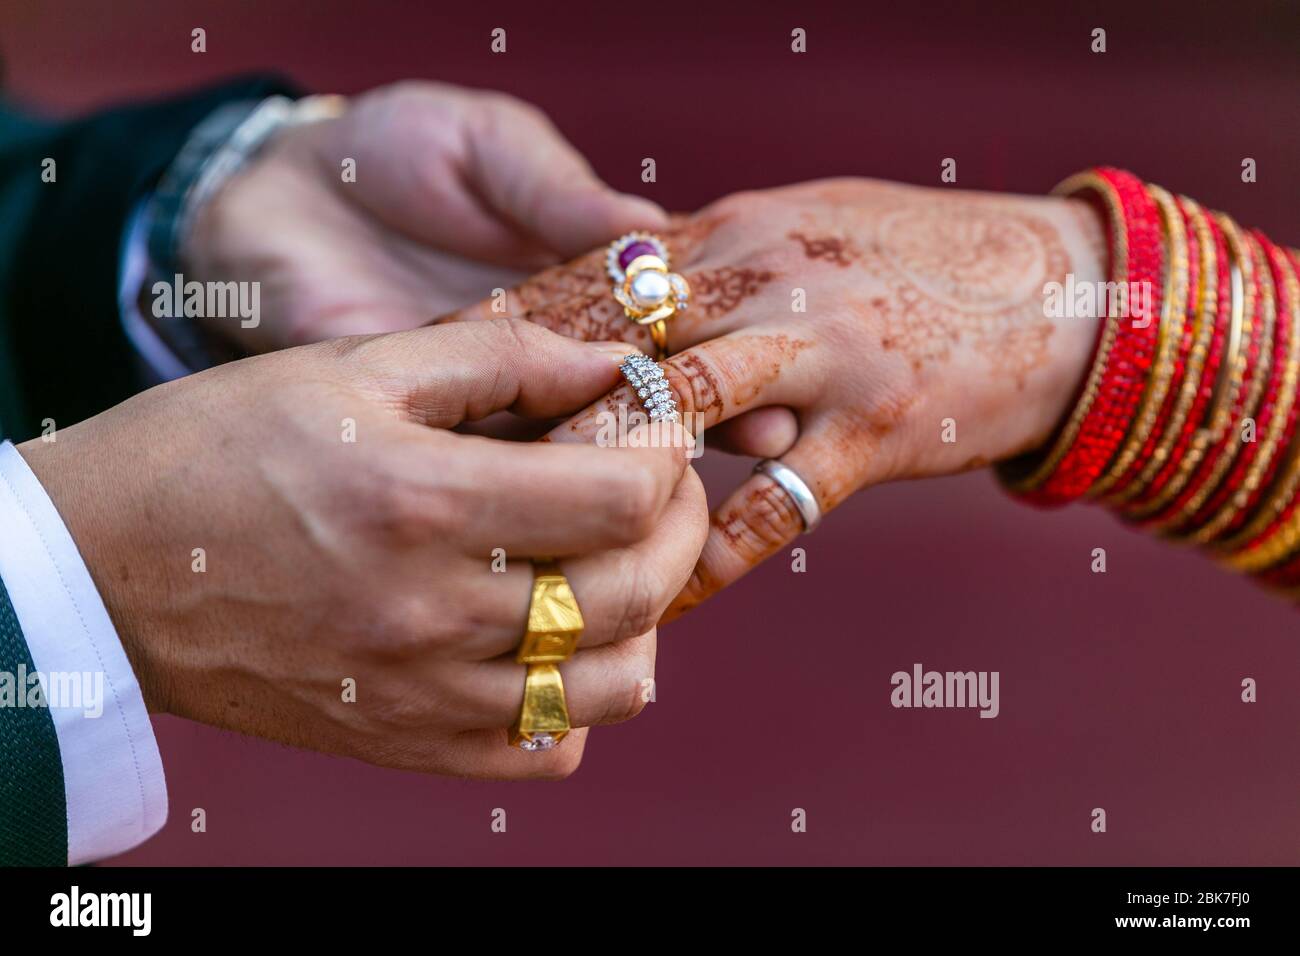 Premium Photo | Wedding ritual of rings for engagement in hands